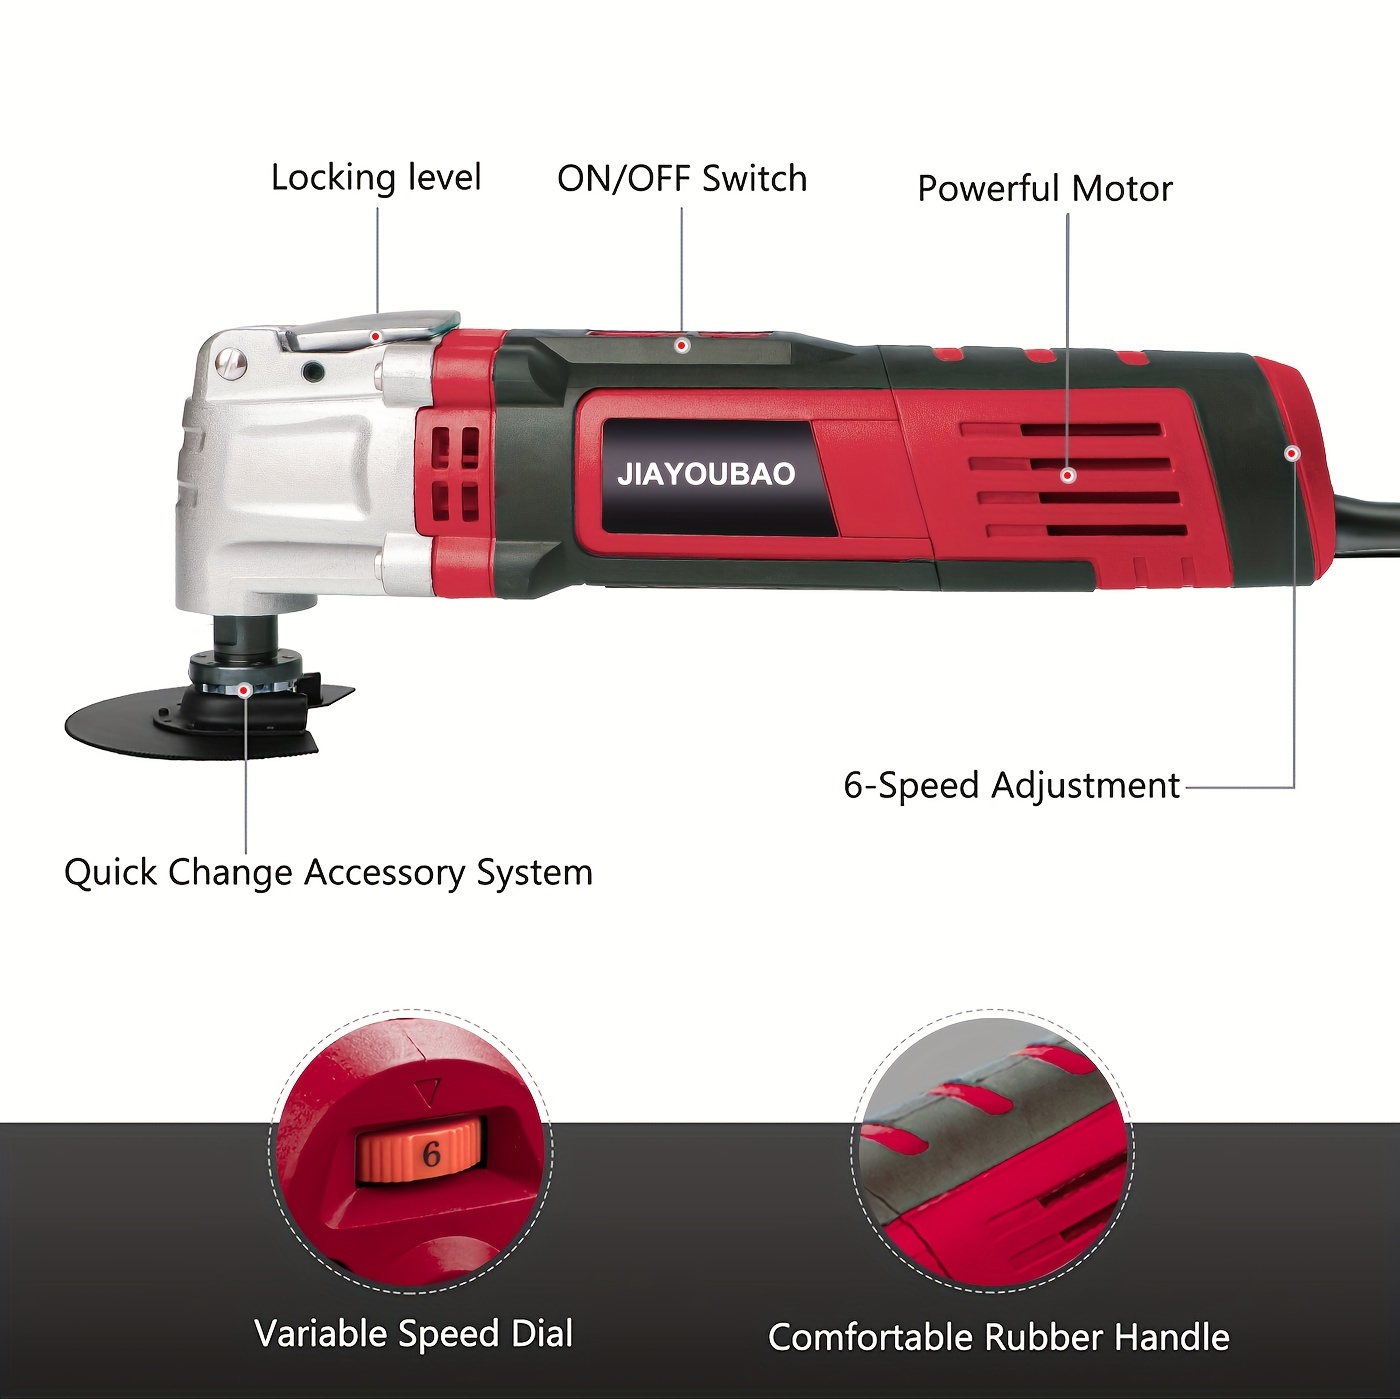 JIAYOUBAO 1 Set Power Oscillating Tool, 4 Amp Oscillating Multi Tool With 4.5° Oscillation Angle, 6 Variable Speeds And 8pcs Saw Accessories